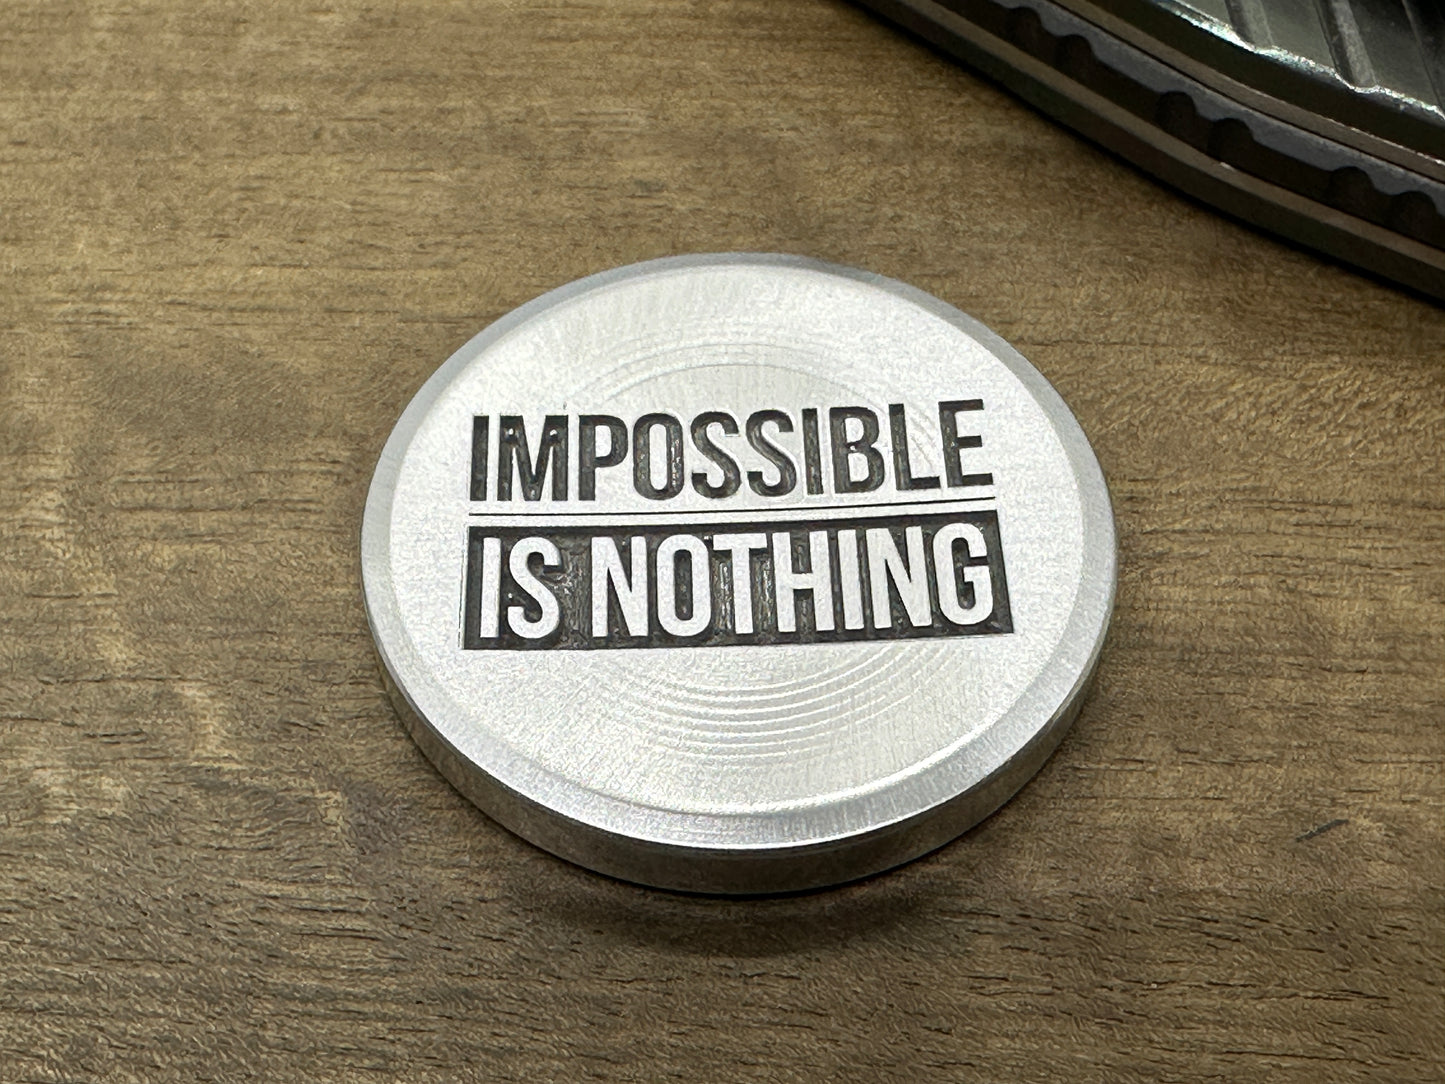 4 sizes Impossible is Nothing - Deep engraved Aluminum Worry Coin